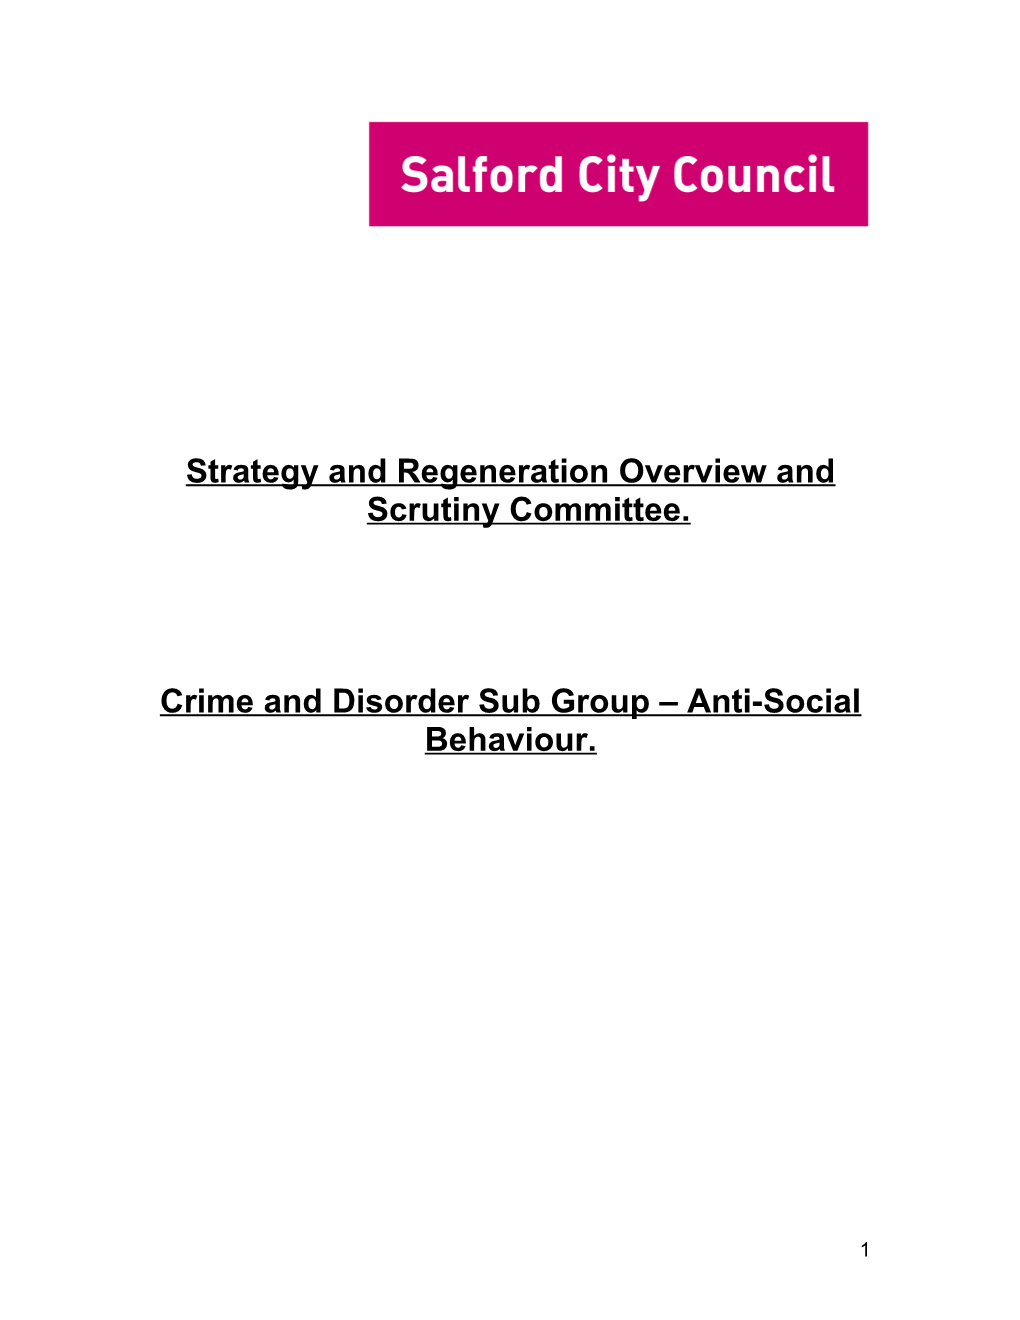 Strategy and Regeneration Overview and Scrutiny Committee